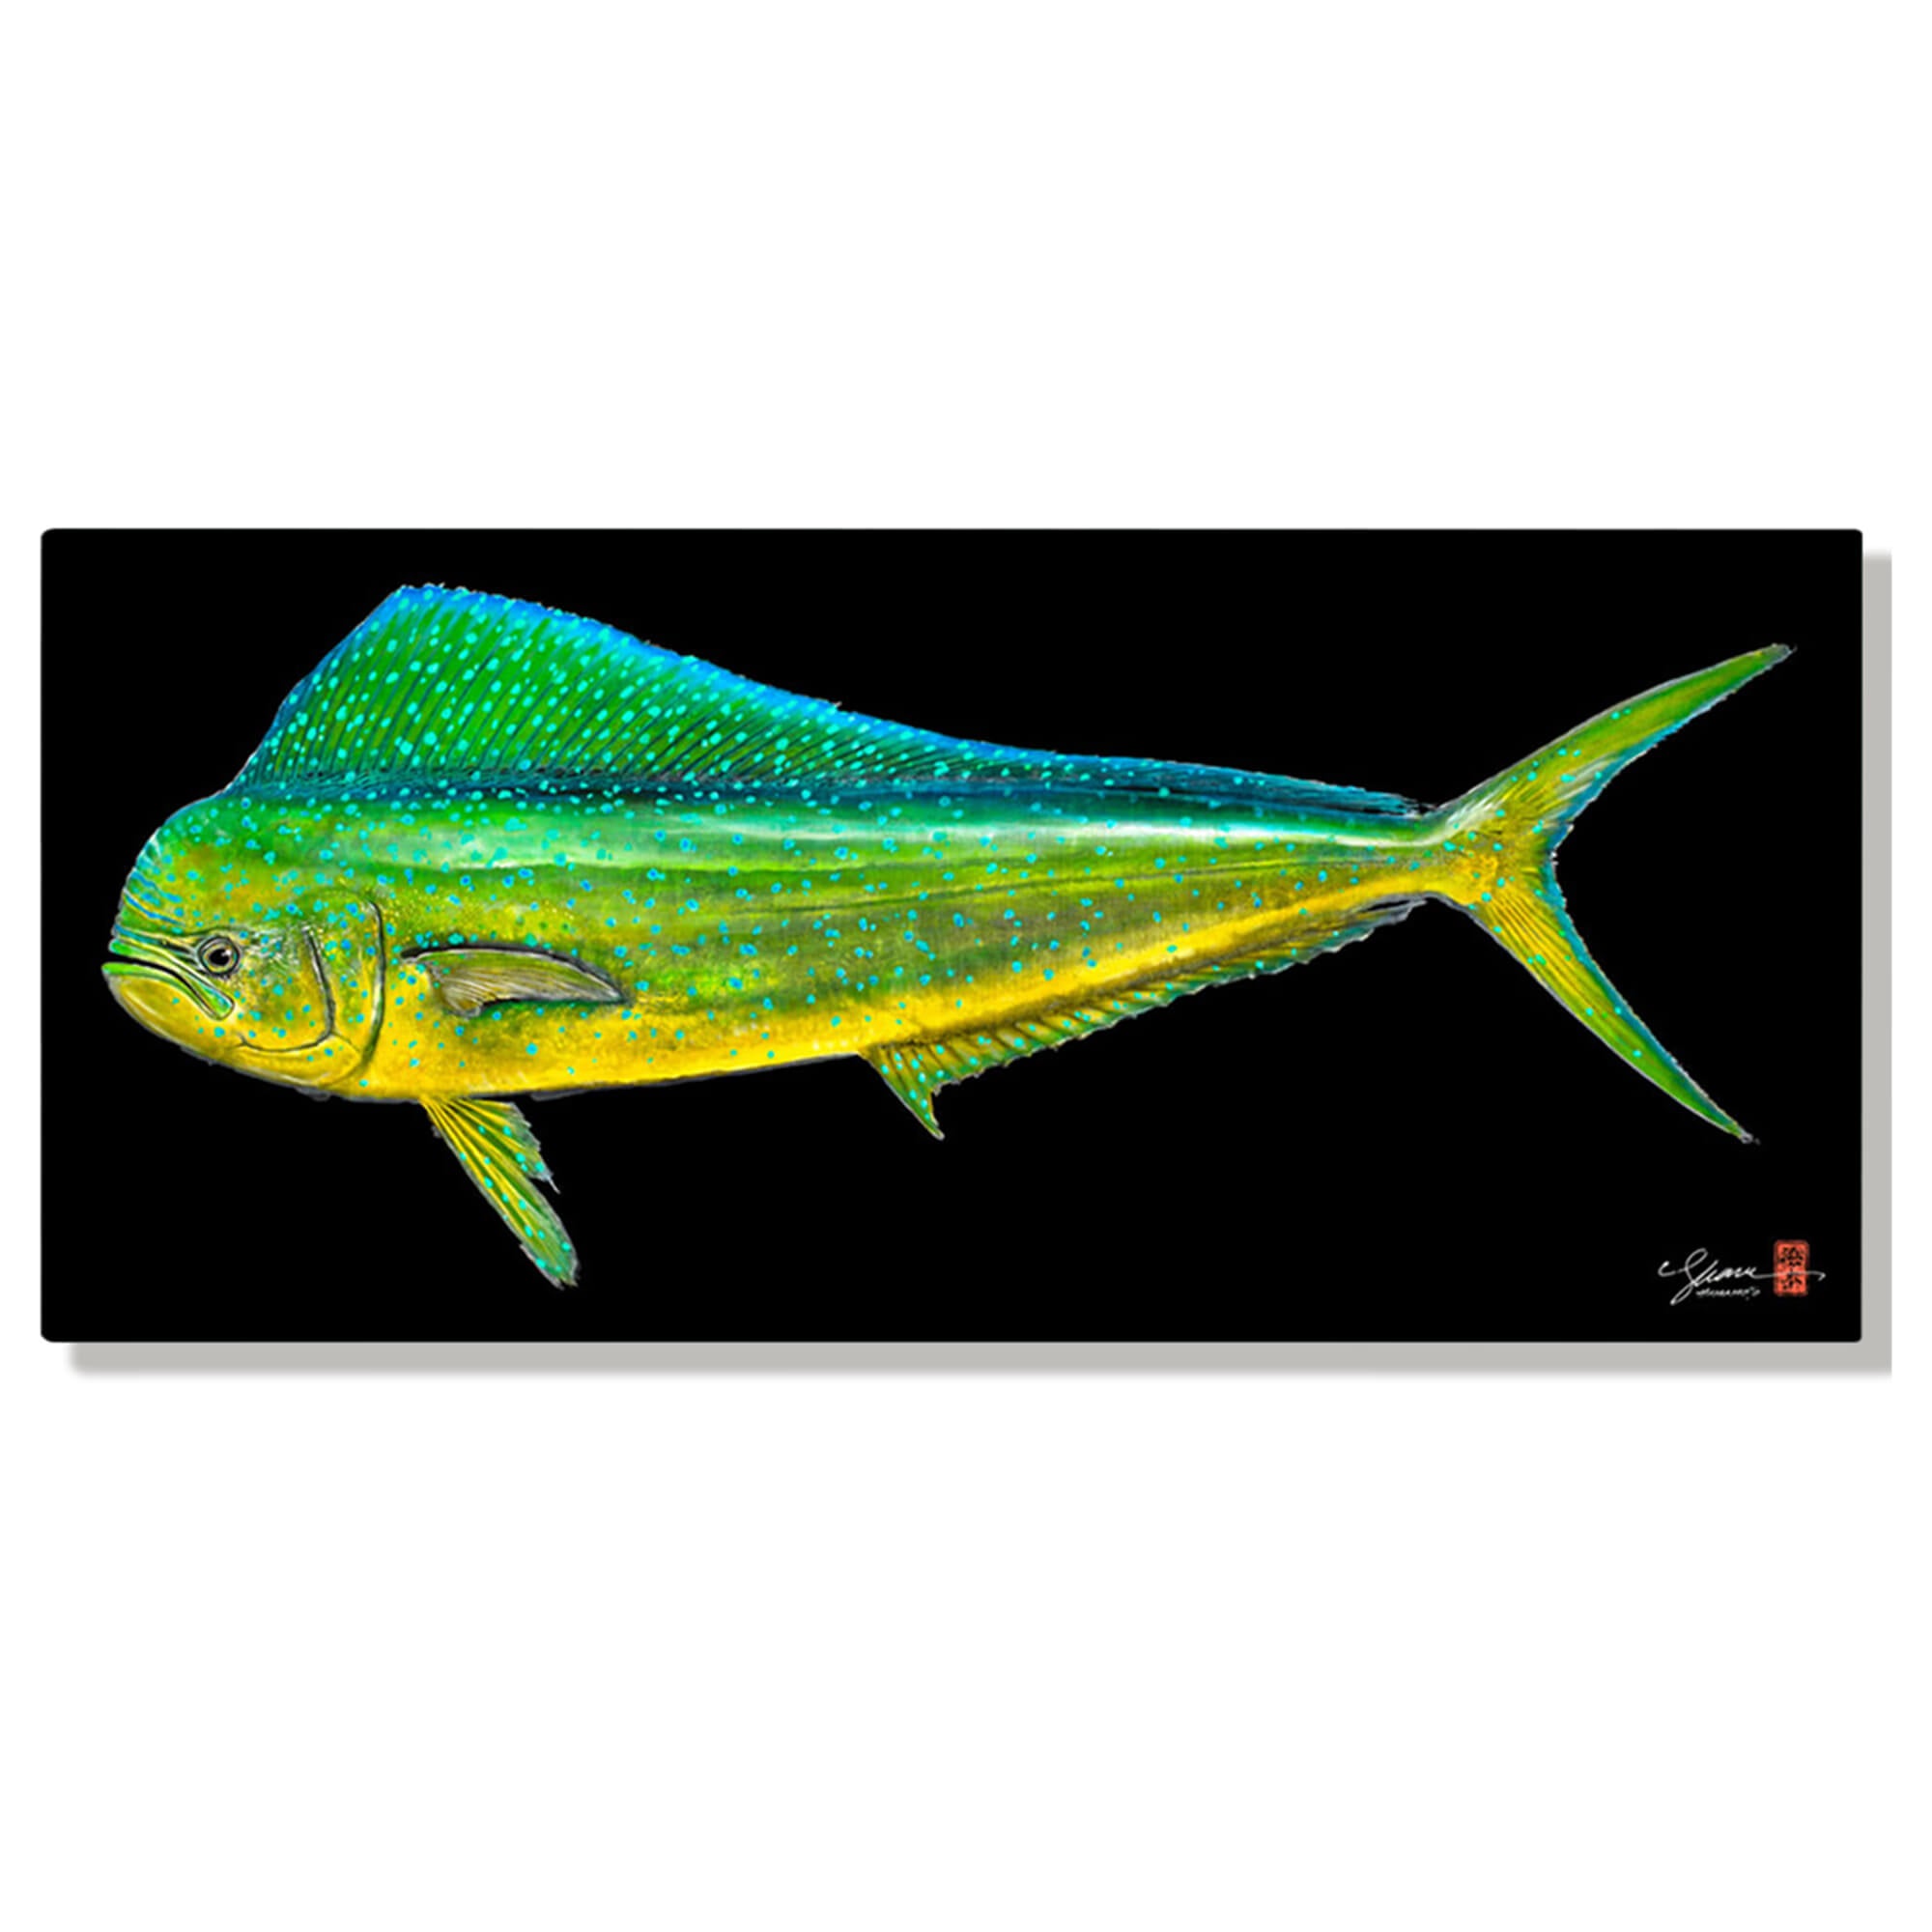 A metal art print of a large Mahi Mahi fish (also known as Dolphin Fish or Dorado) distinguished by dazzling colors - golden on the sides, and bright blues and greens on the sides and back by Hawaii Gyotaku artist Shane Hamamoto